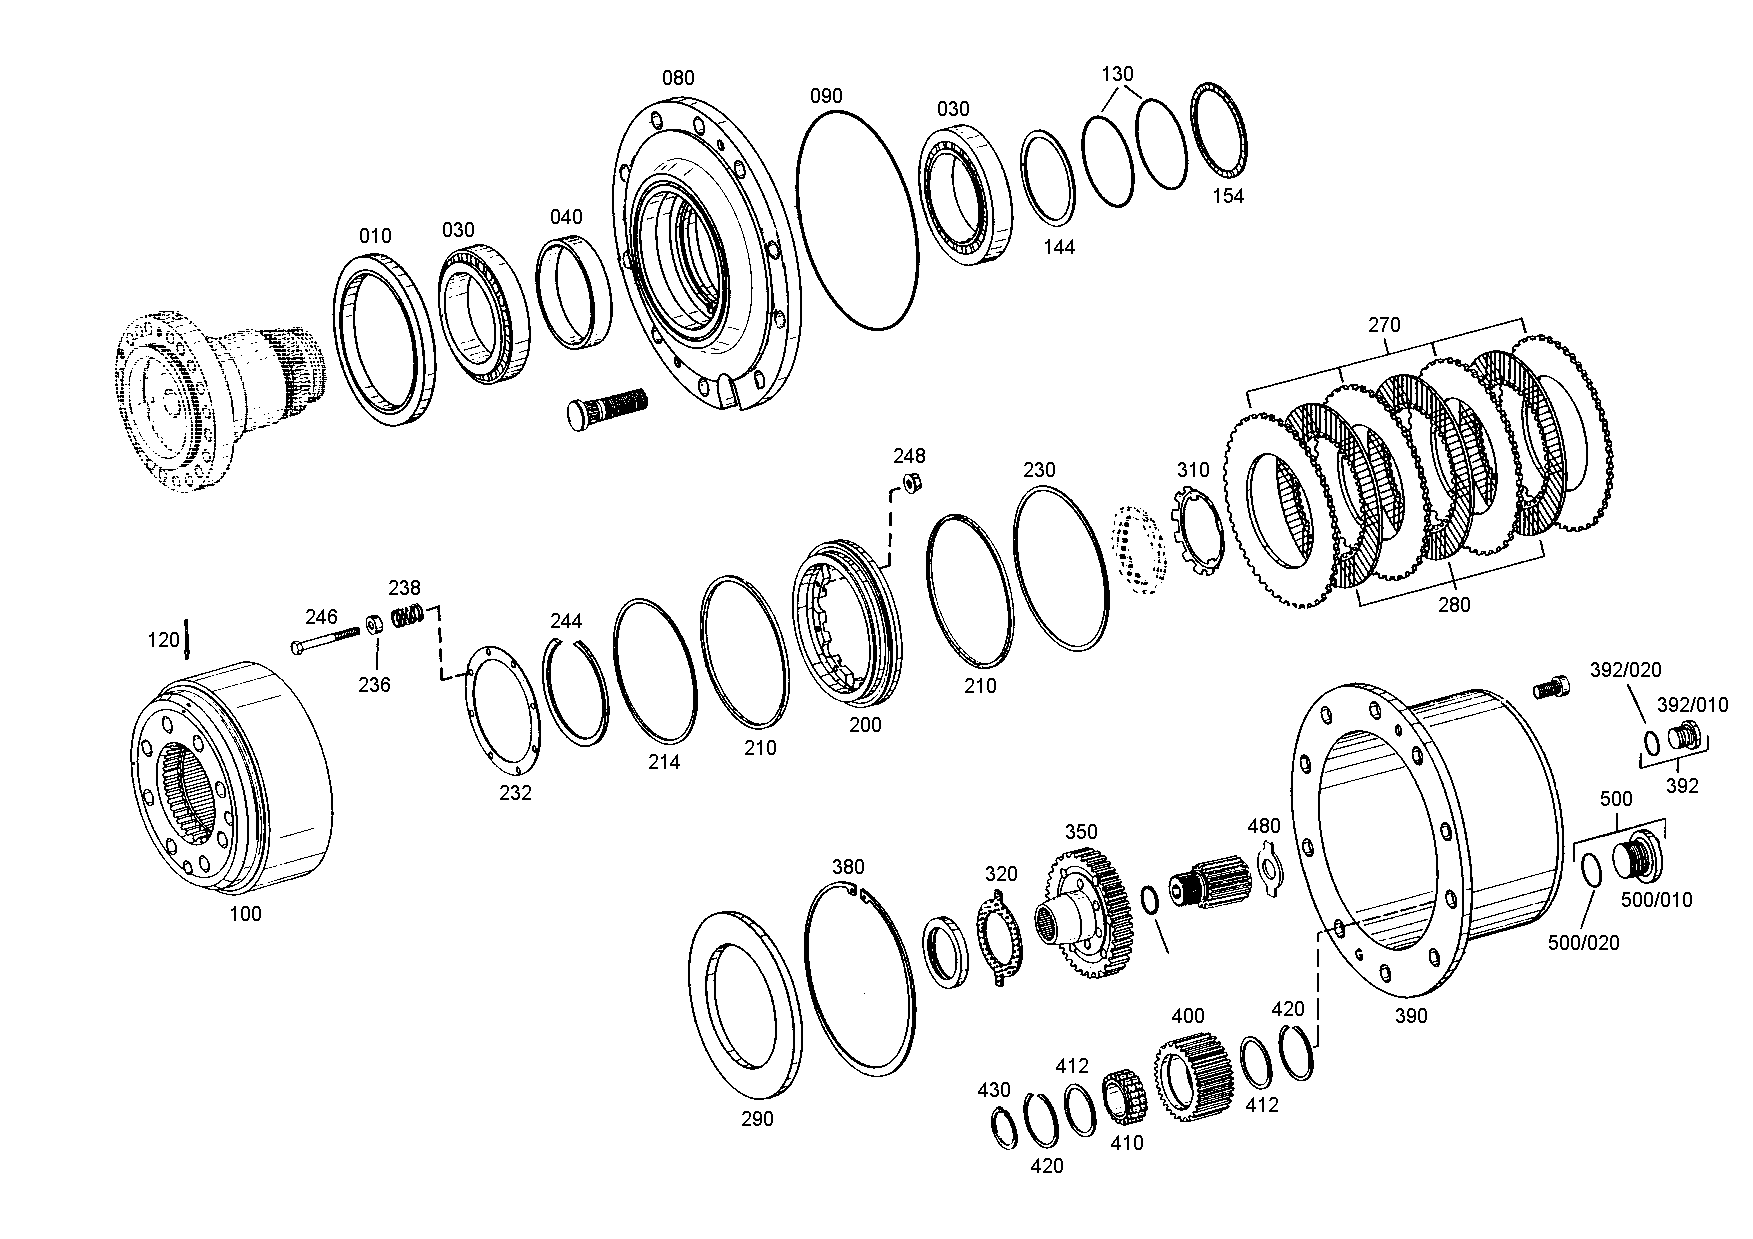 drawing for AGCO 020812R1 - O-RING (figure 2)